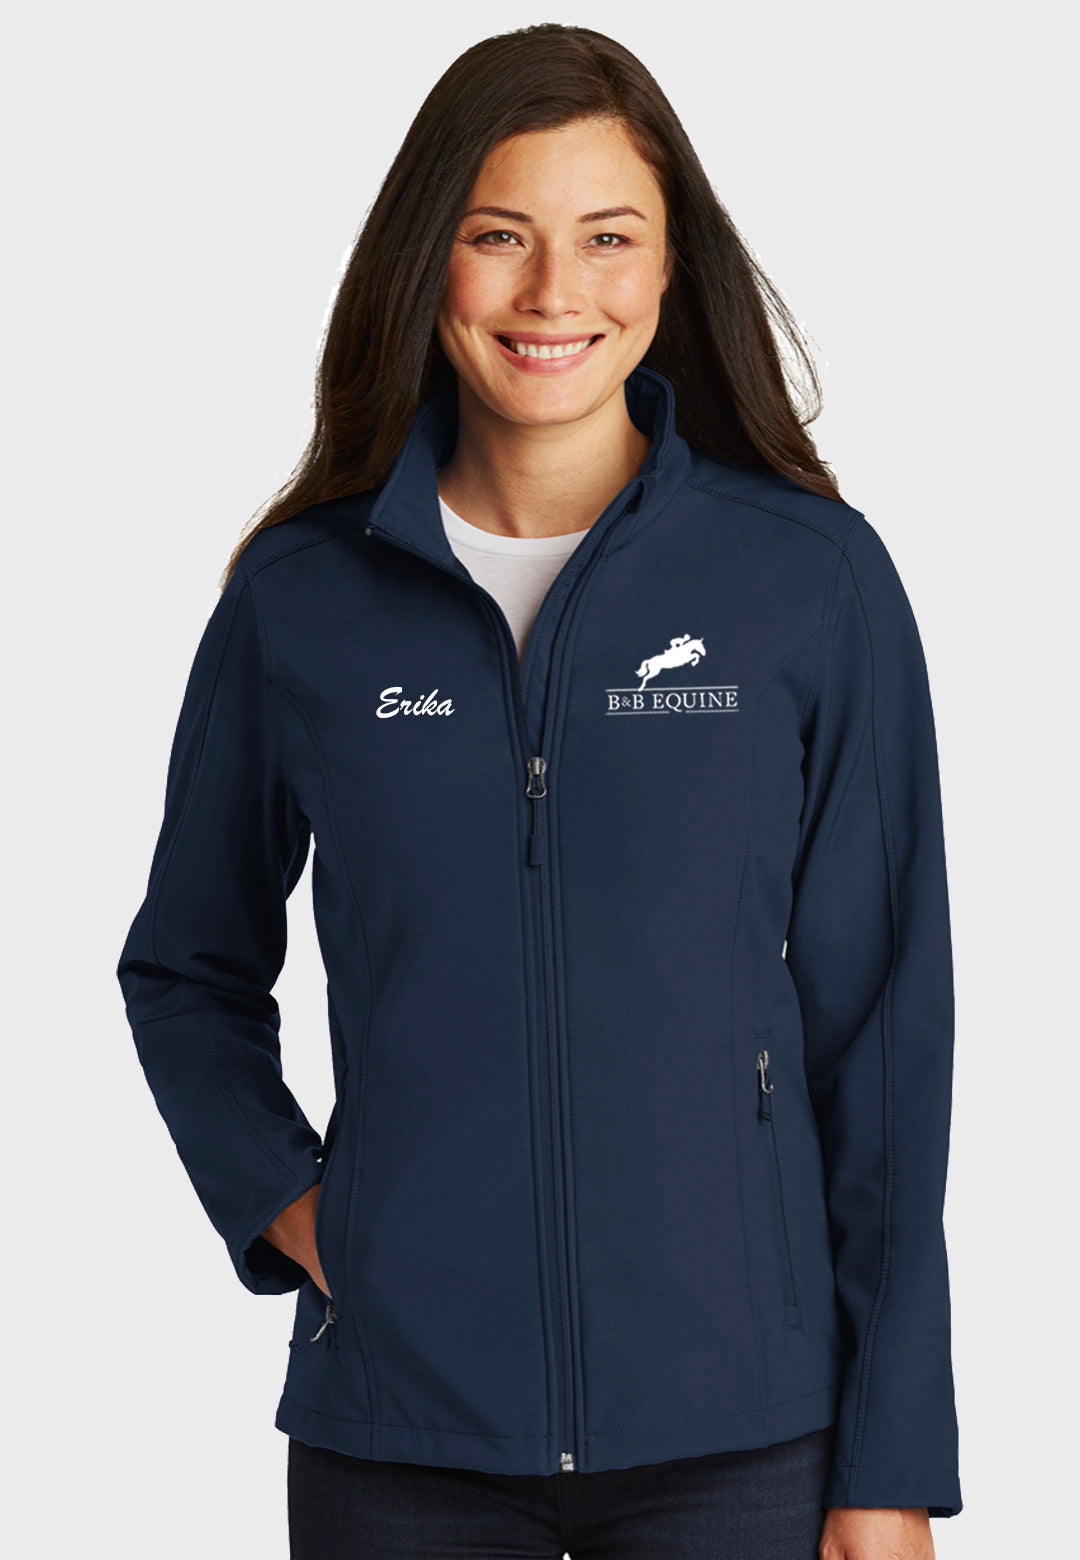 B & B Equine Port Authority® Core Soft Shell Jacket - Men's/Ladies/Youth Sizes, 2 Color Options